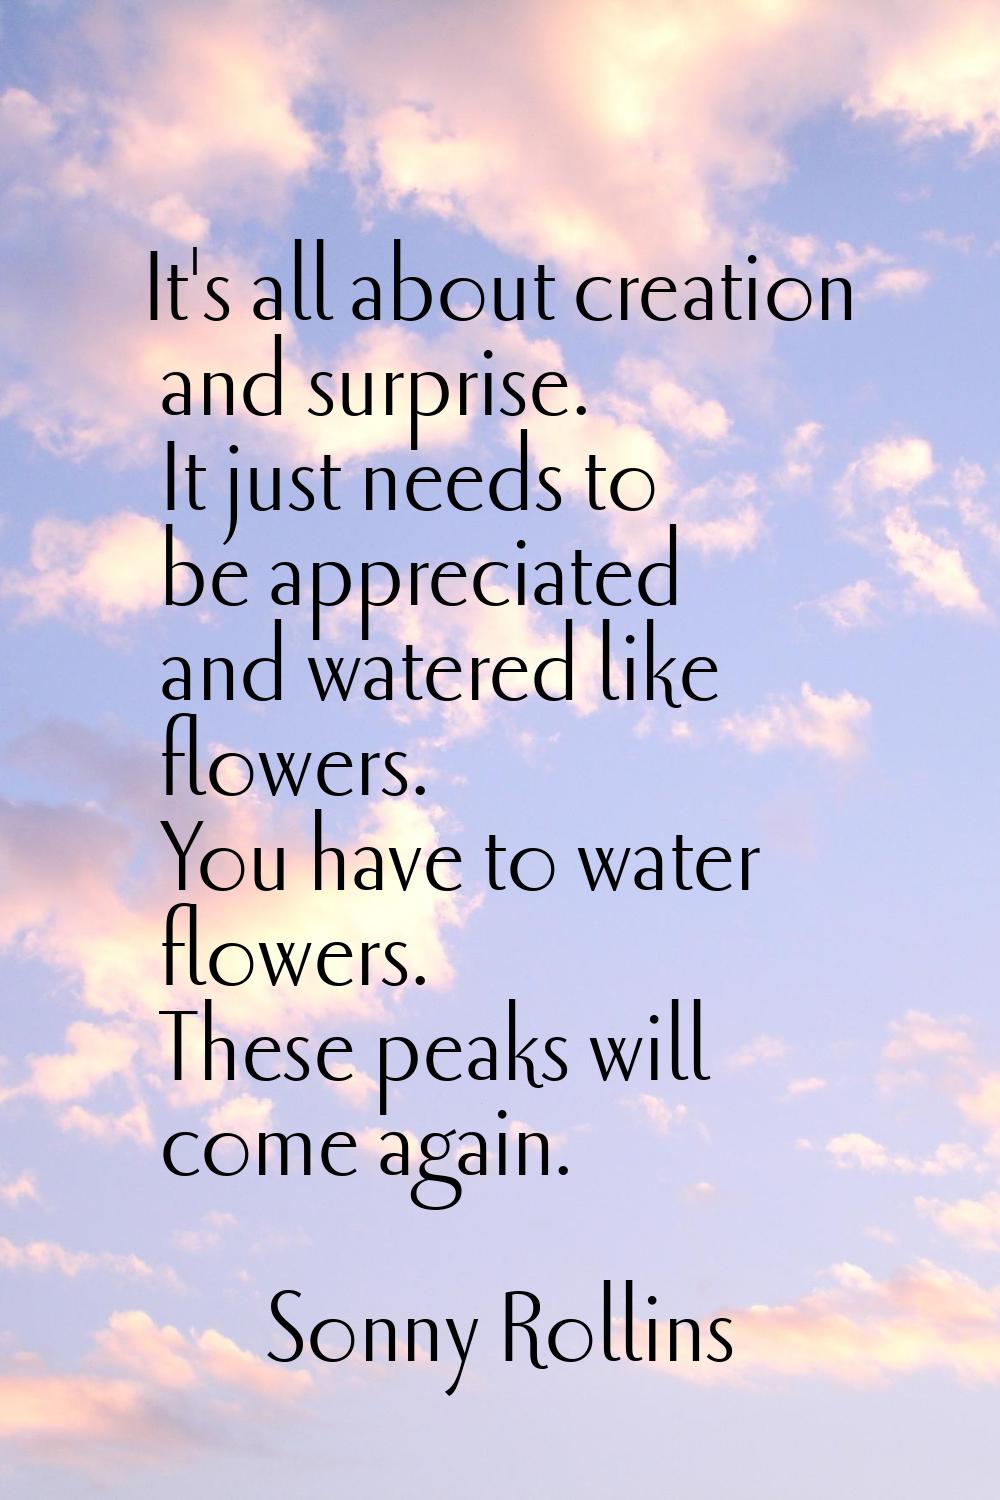 It's all about creation and surprise. It just needs to be appreciated and watered like flowers. You